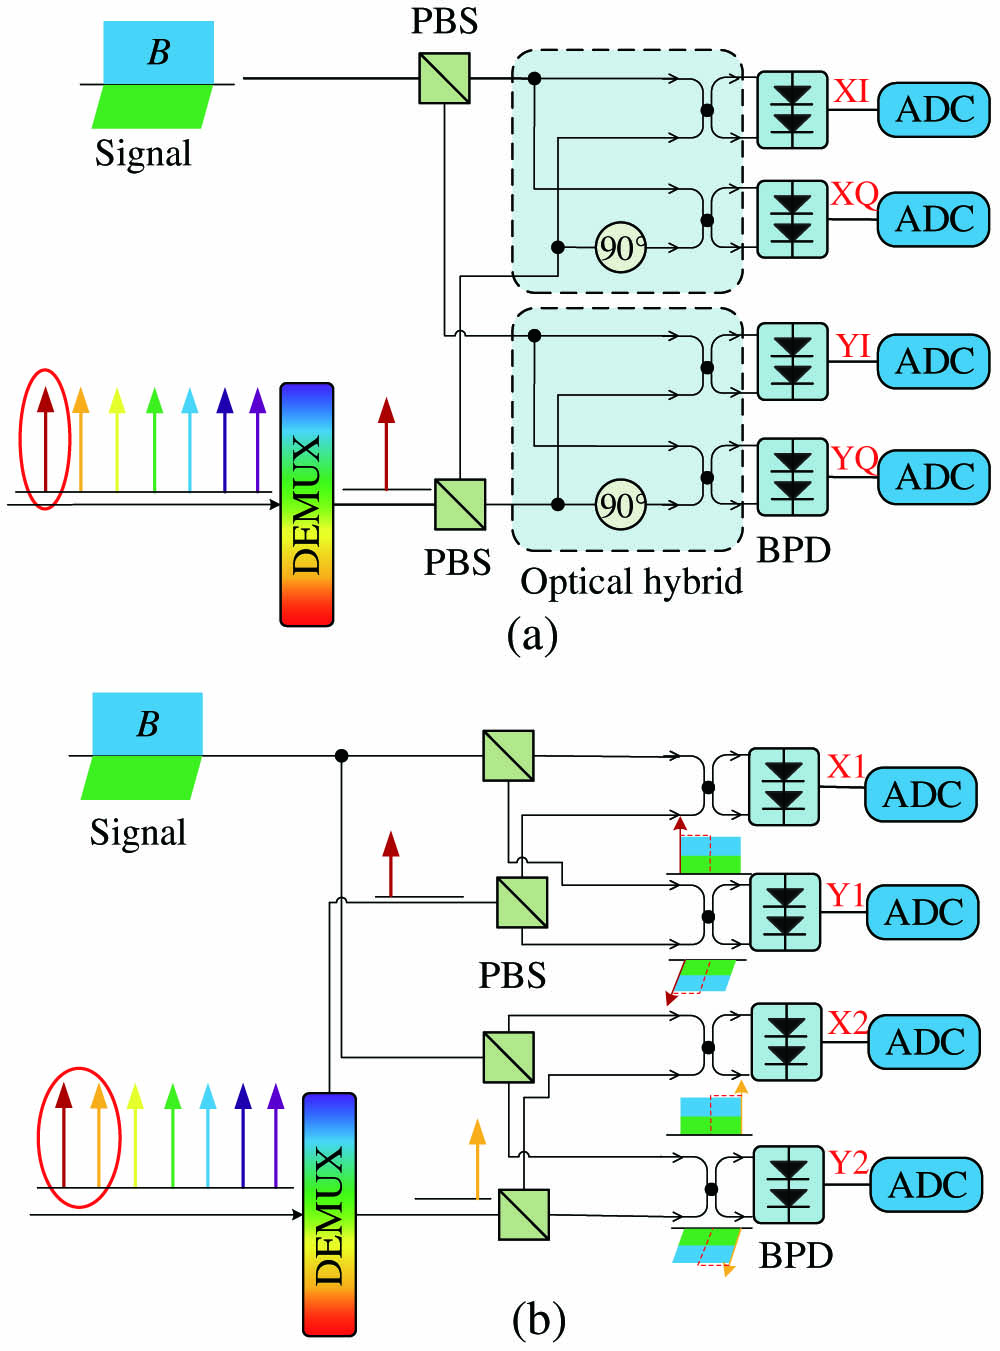 Configuration of (a) the ICR and (b) the proposed SHCR in OFC-based architecture. ADC, analog-to-digital converter; DEMUX, demultiplexer; PBS, polarization beam splitter.